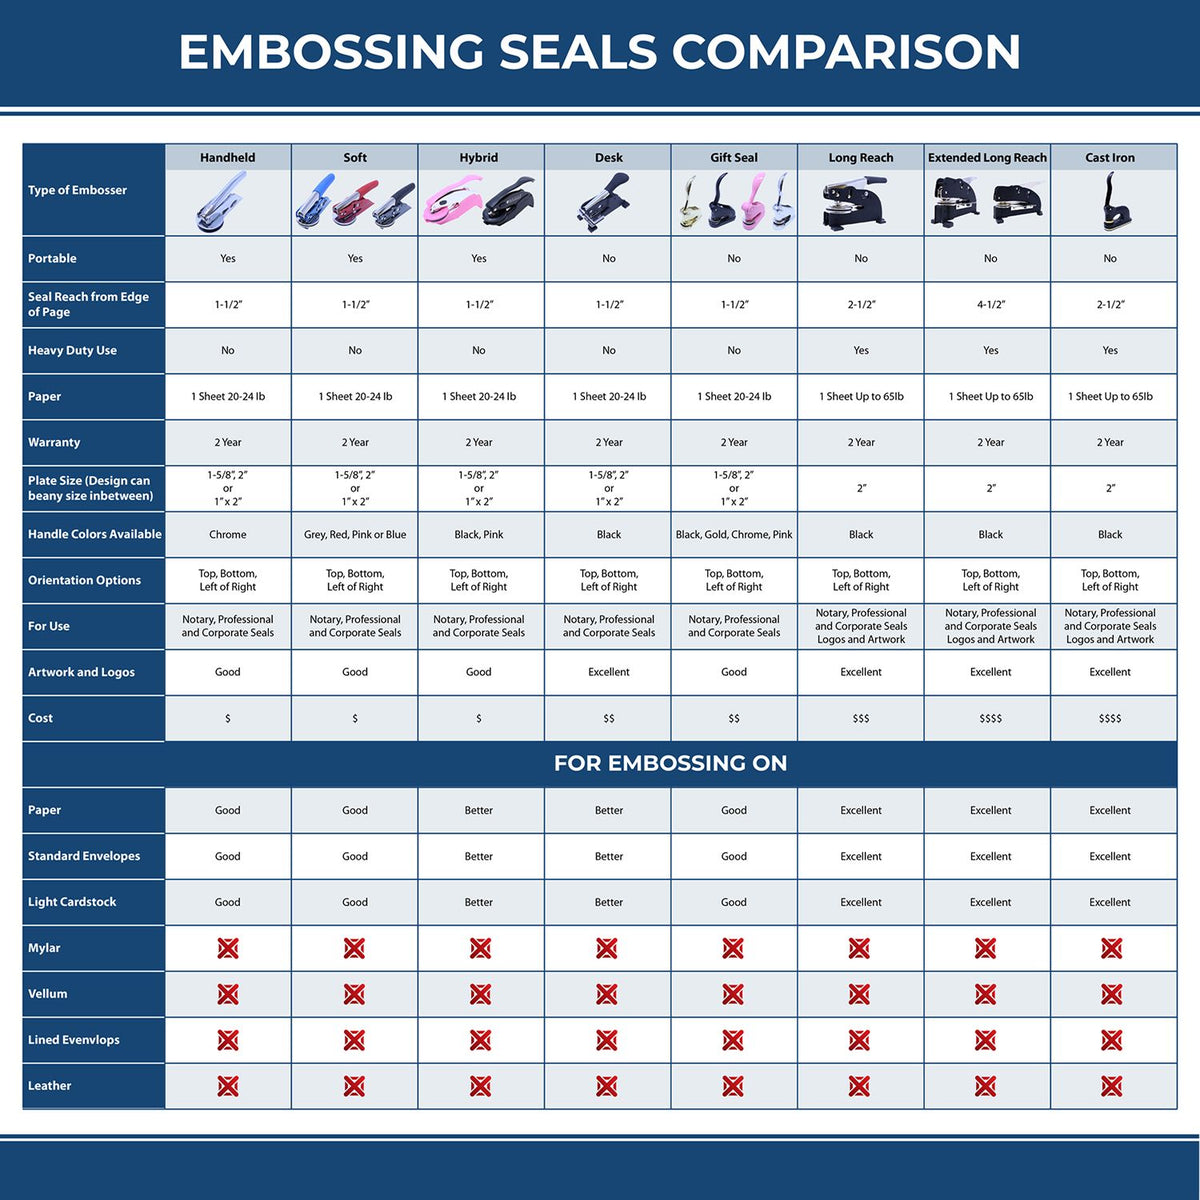 A comparison chart for the different types of mount models available for the Soft Hawaii Professional Geologist Seal